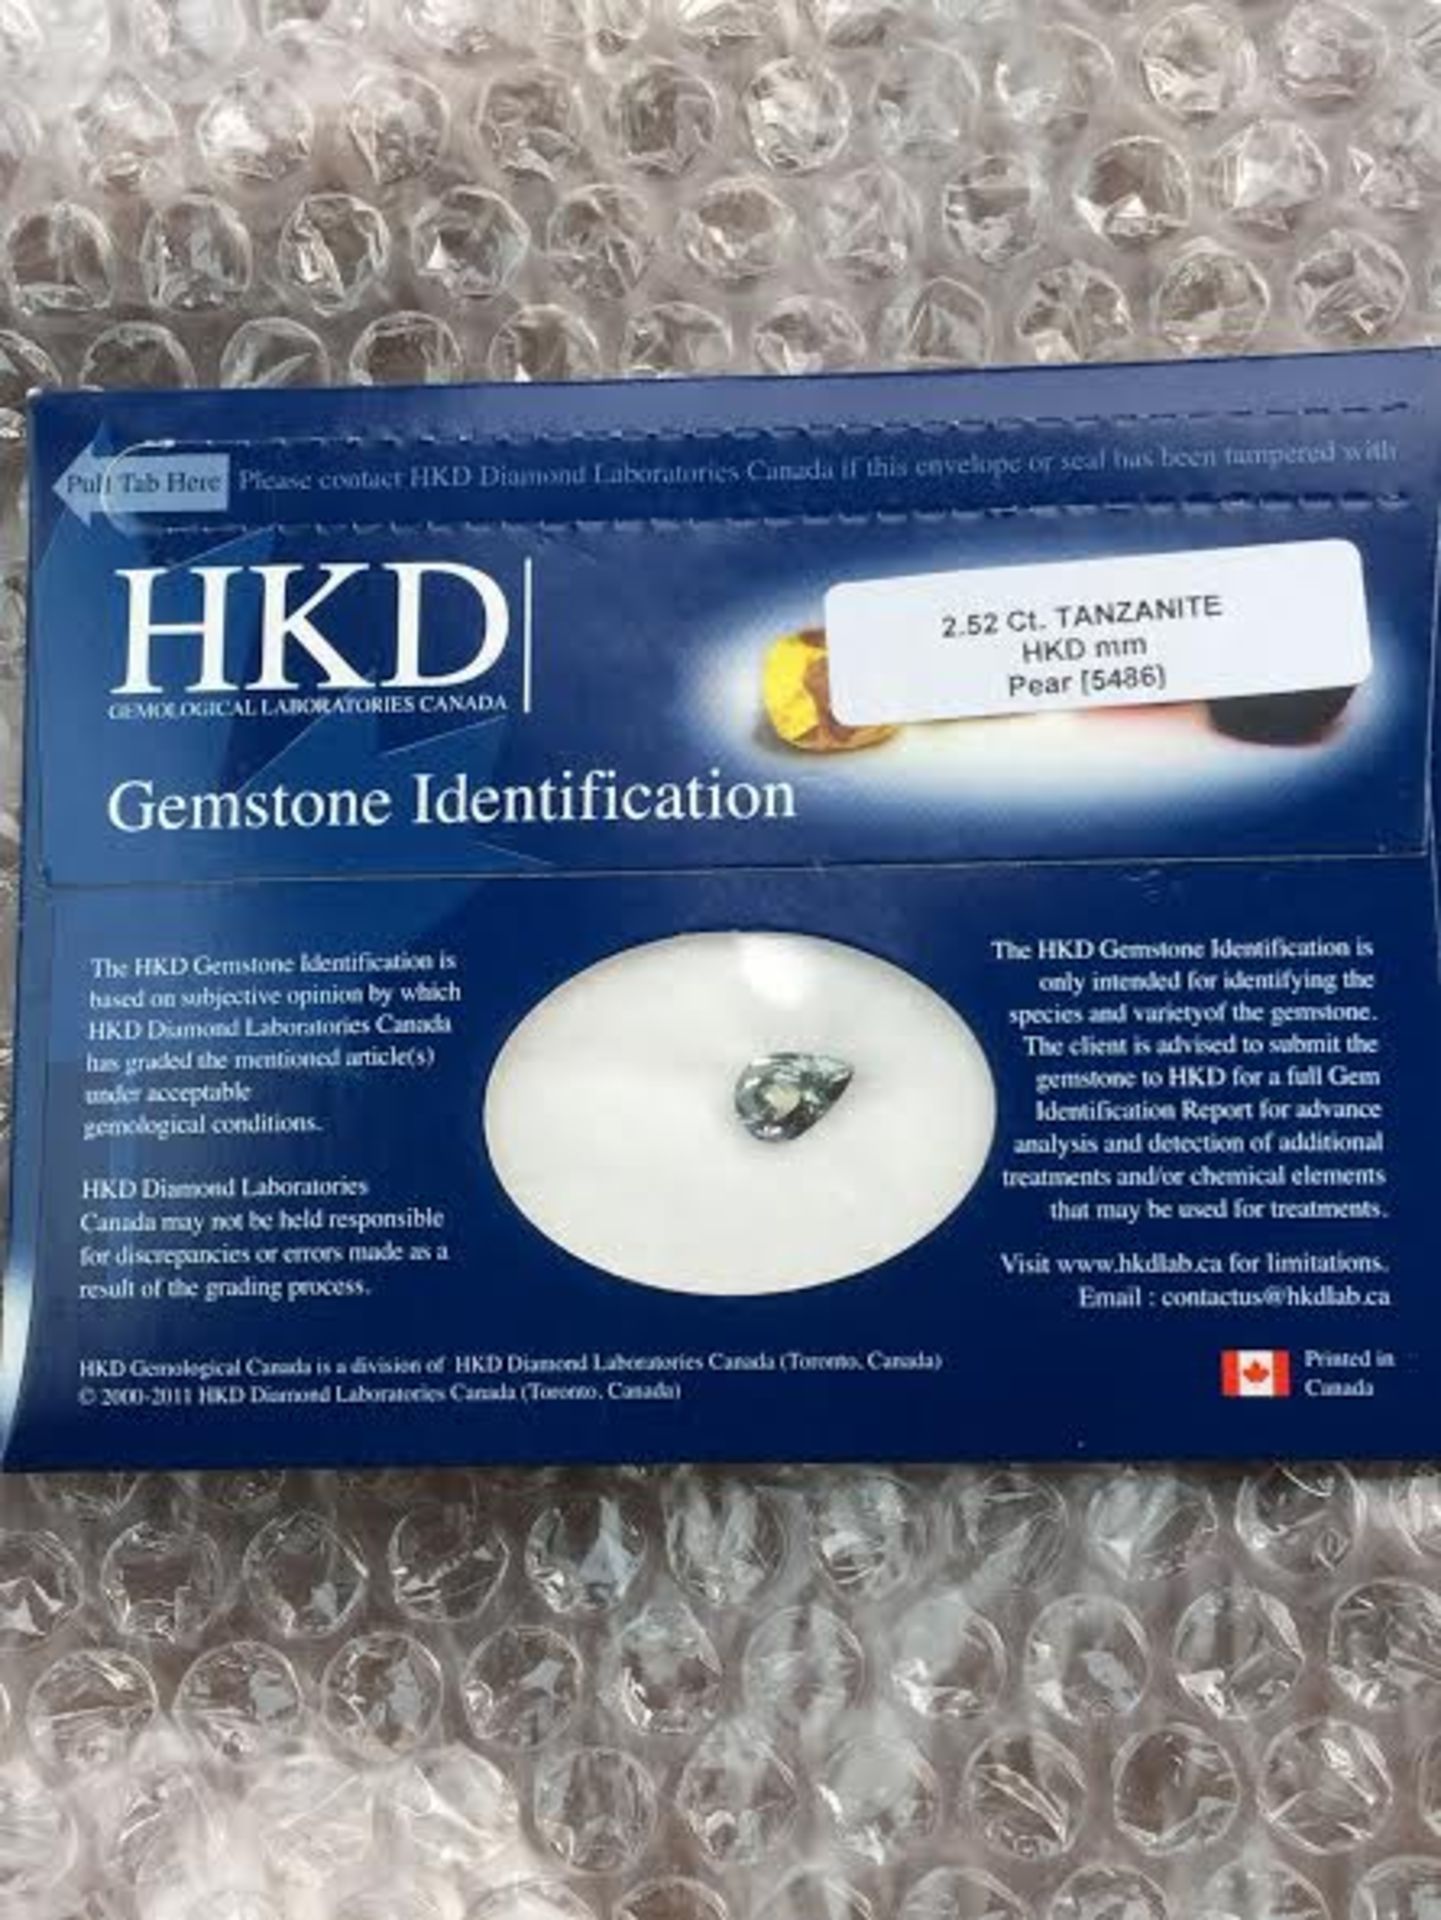 2.52 ct natural Tanzanite with HKD certificate - Image 3 of 3